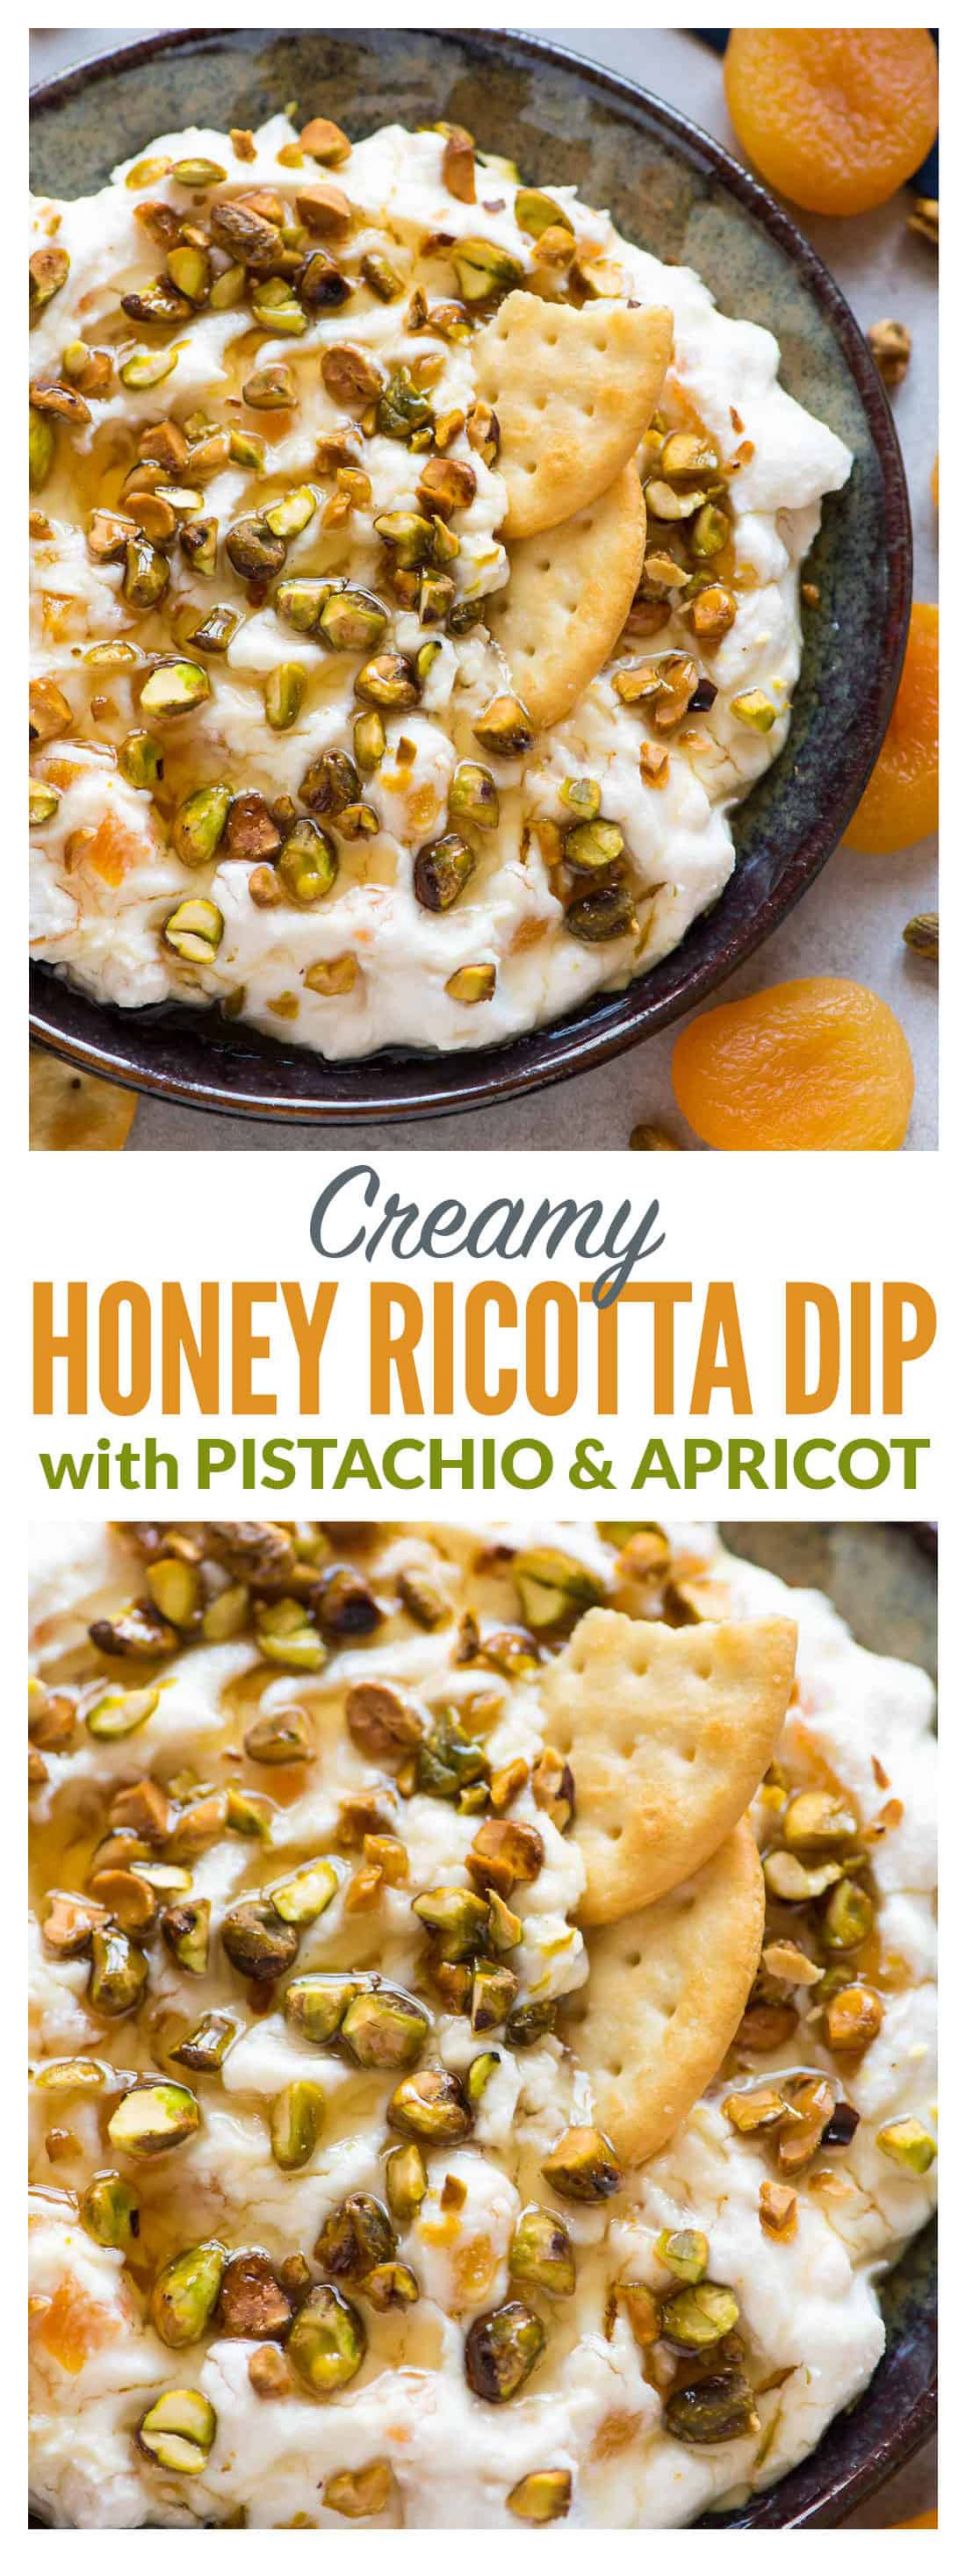 Ricotta Cheese Appetizers
 Honey Ricotta Dip with Pistachio and Apricot